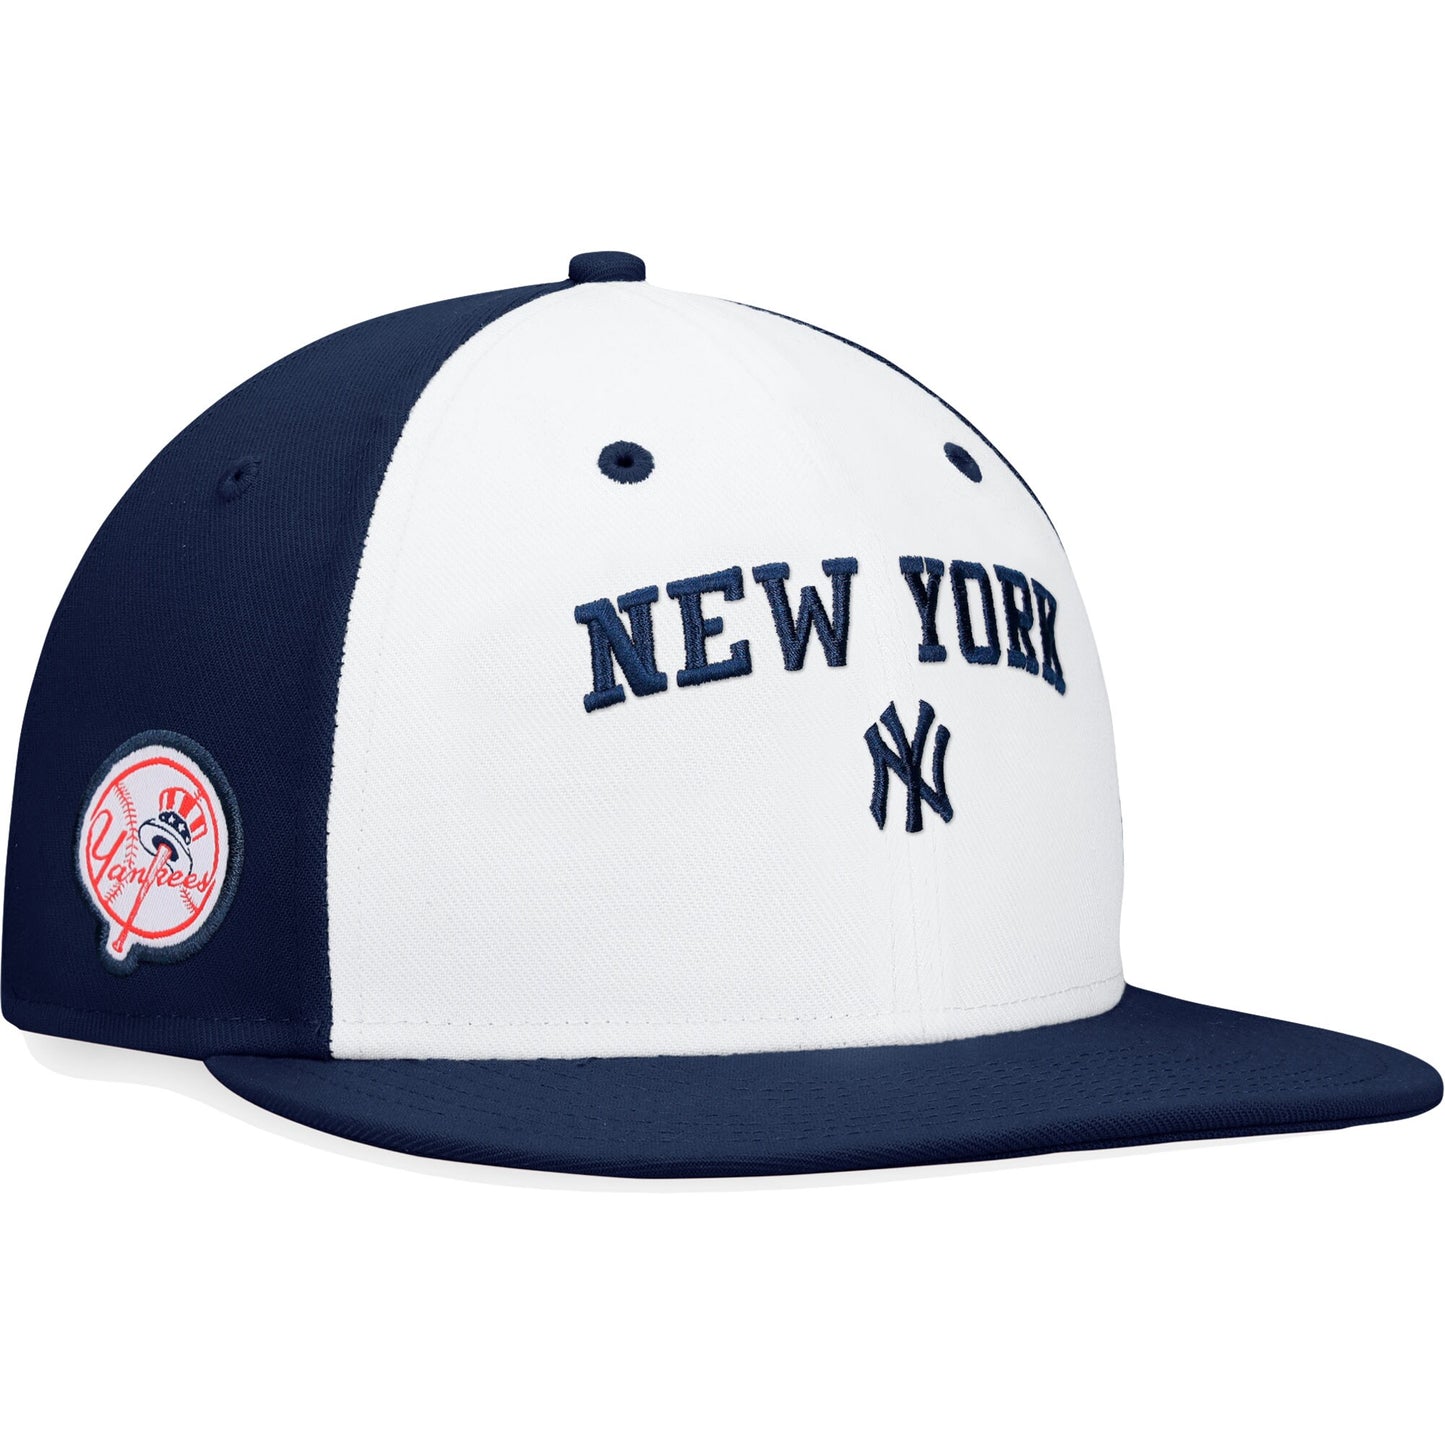 New York Yankees Fanatics Branded Iconic Color Blocked Fitted Hat - White/Navy